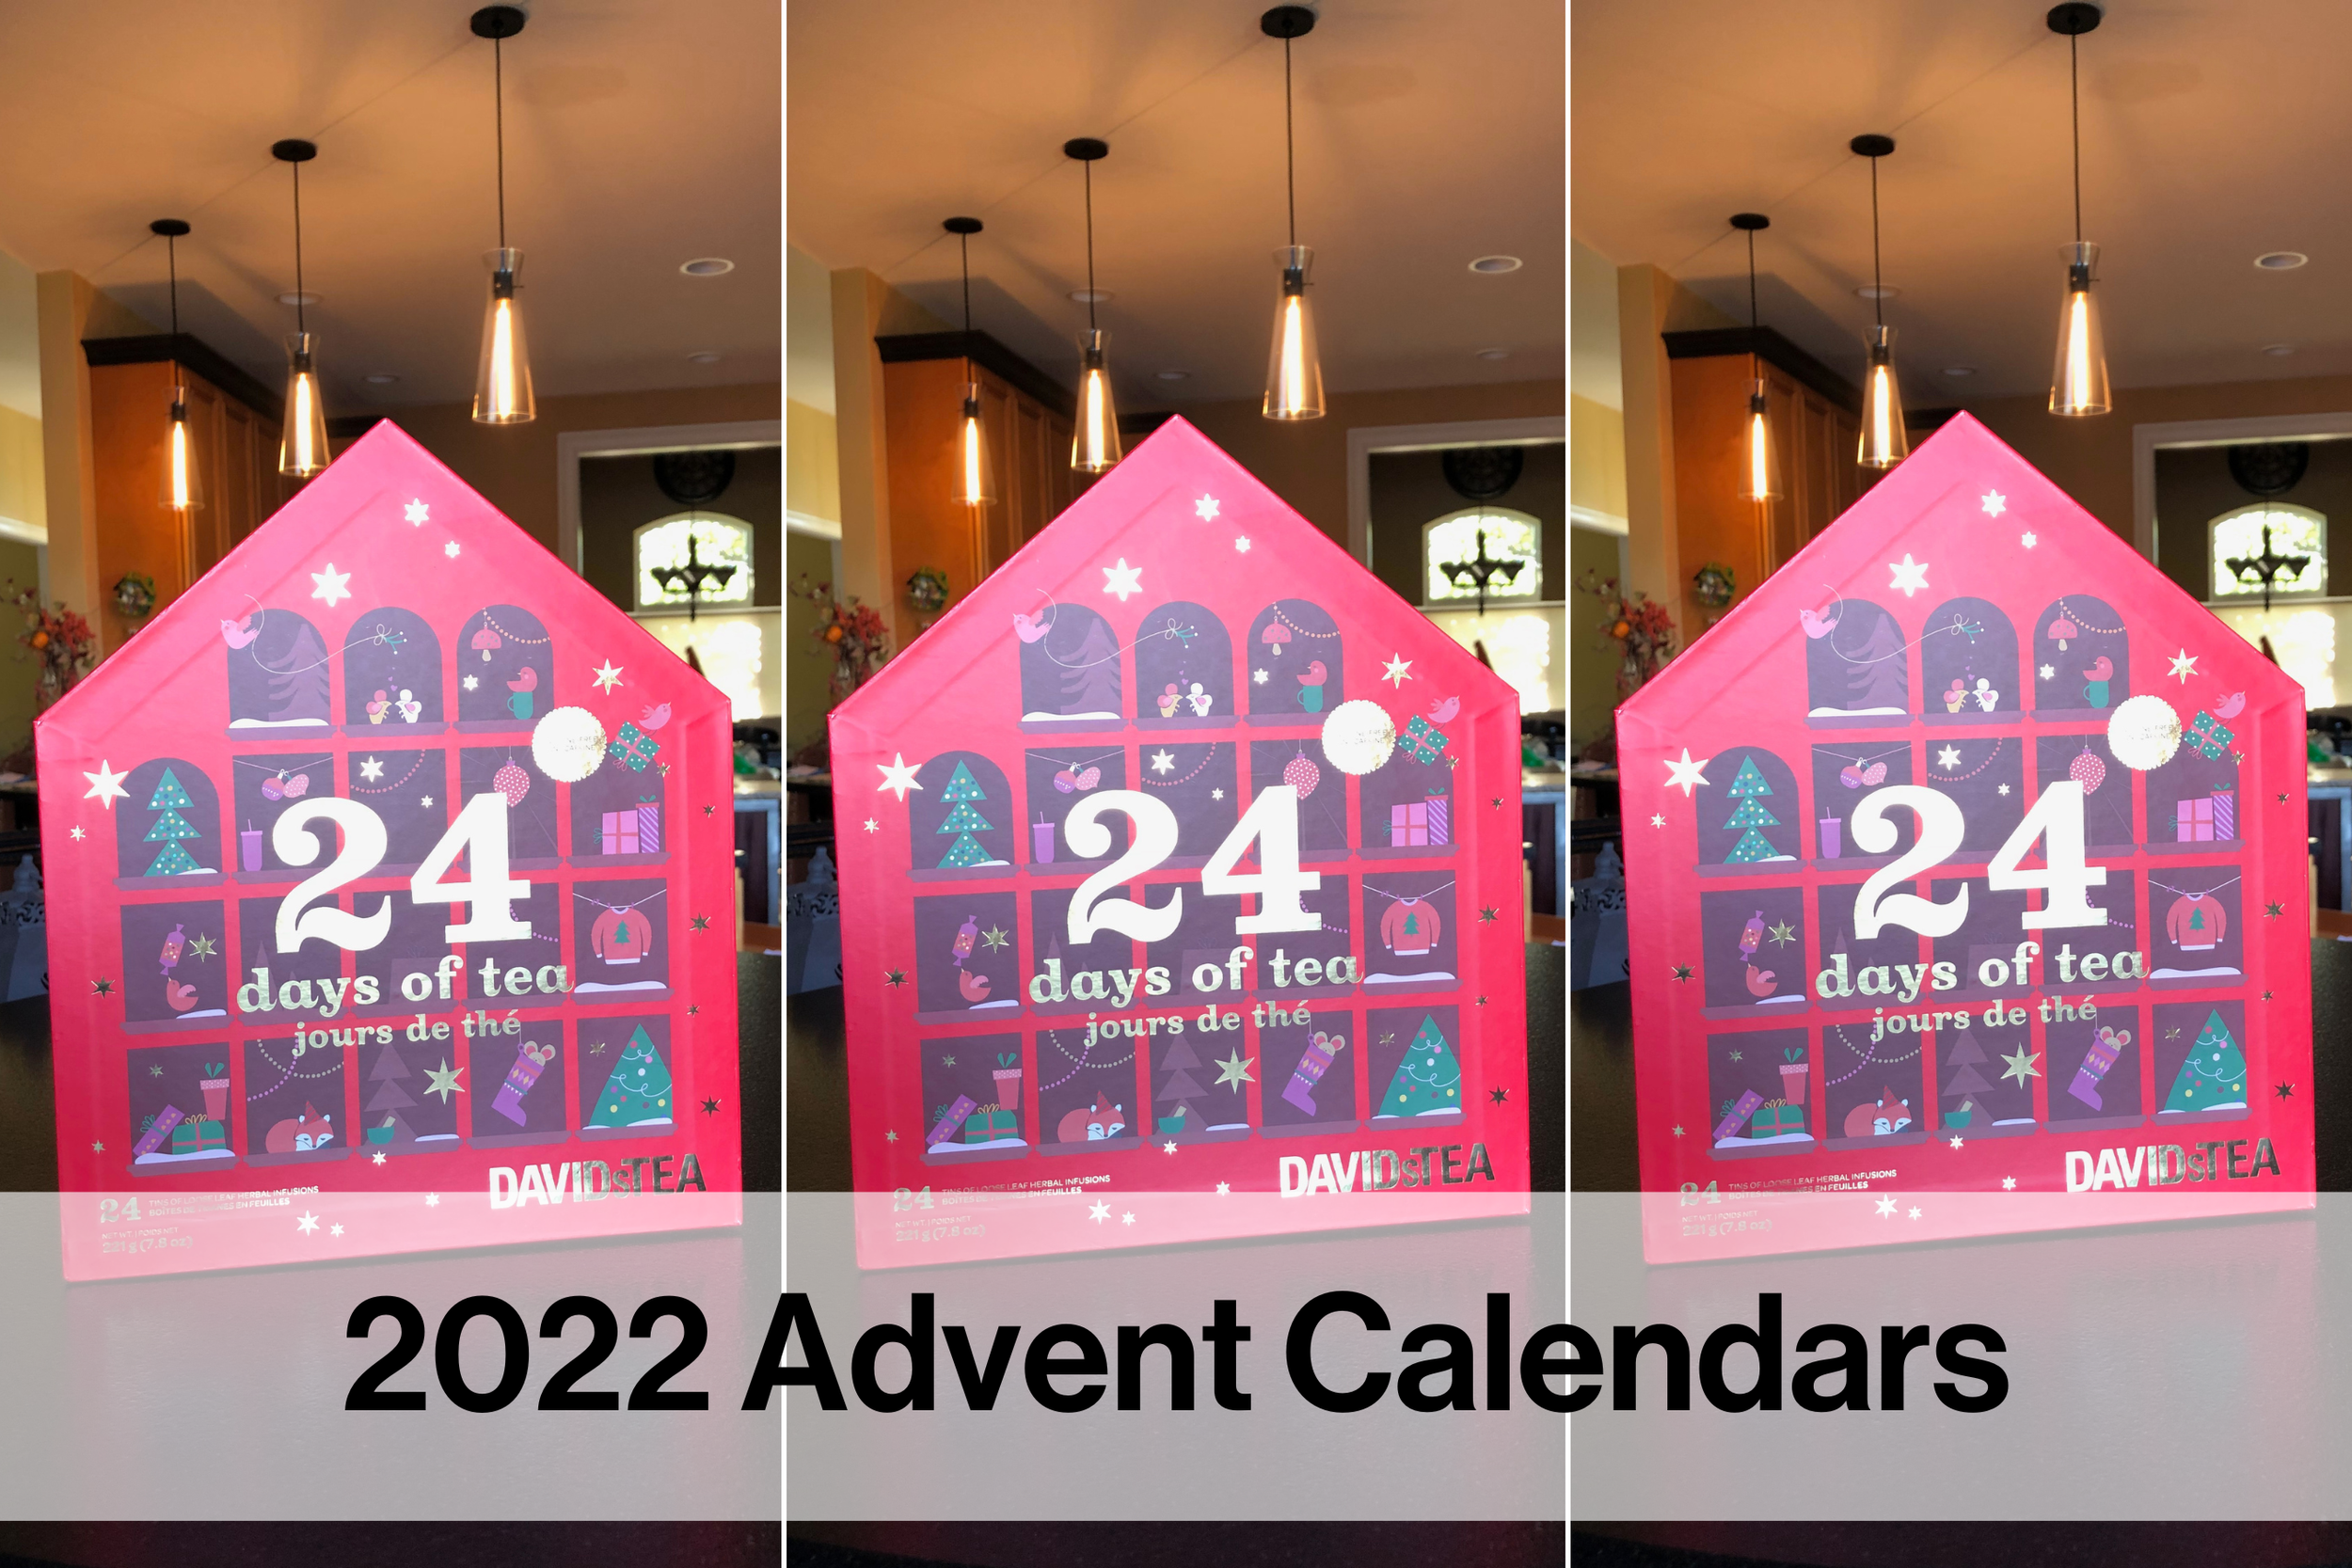 Advent calendars 2021: Here are the most unique holiday season